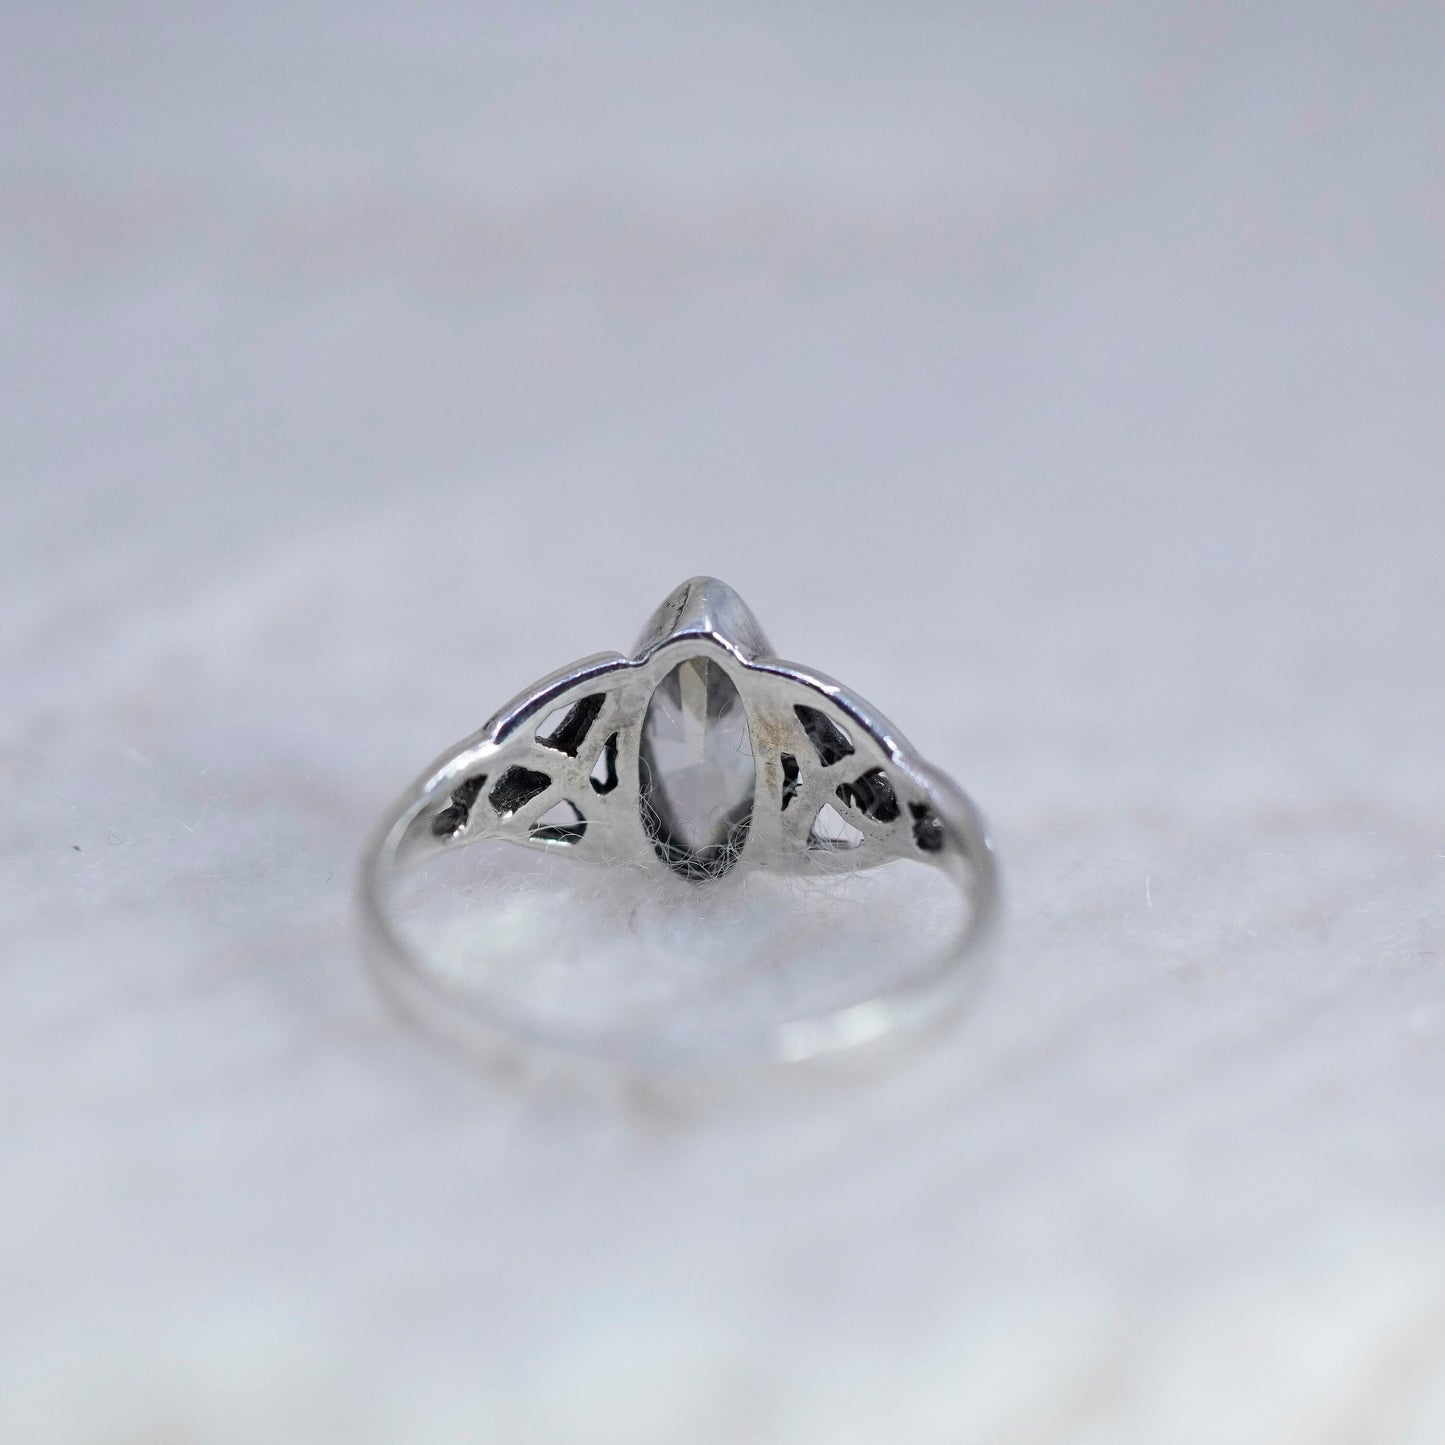 Size 5, Vintage sterling silver handmade ring, irish Celtic knot ring with cz